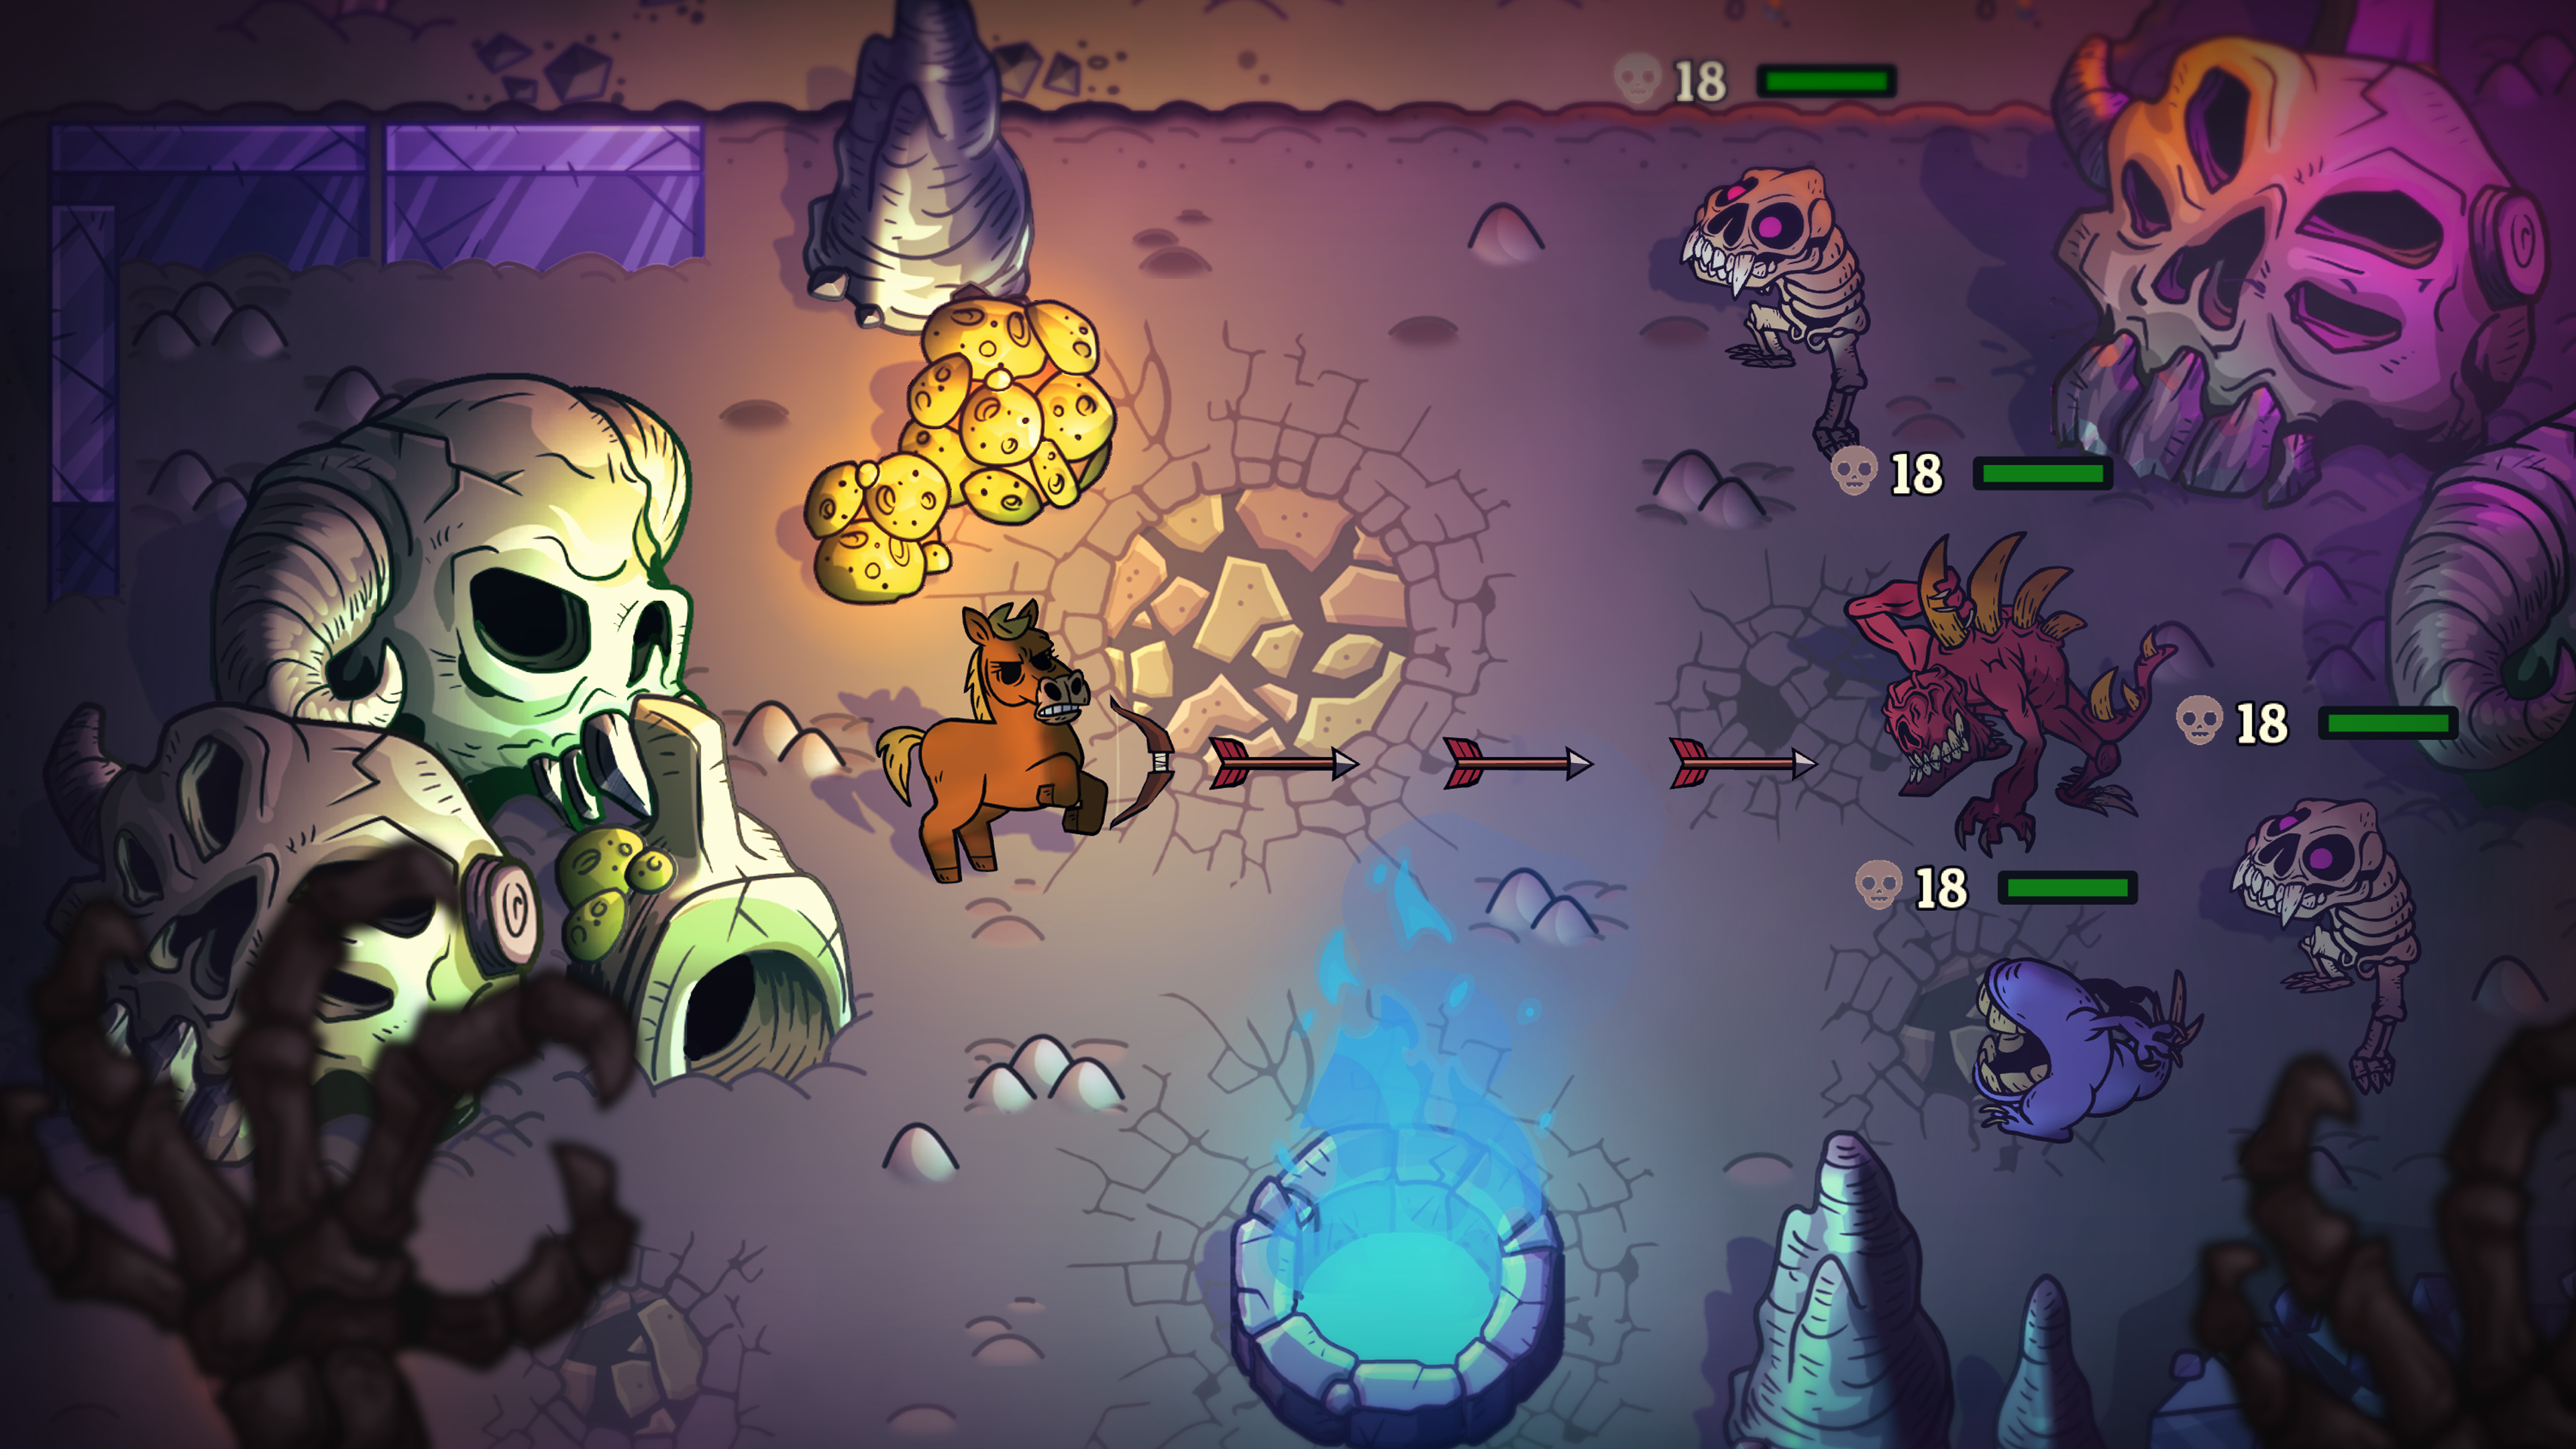 gameplay view of Nobody Saves the World. Overhead view of a video game dungeon where an angry horse launches arrow attacks at enemies.